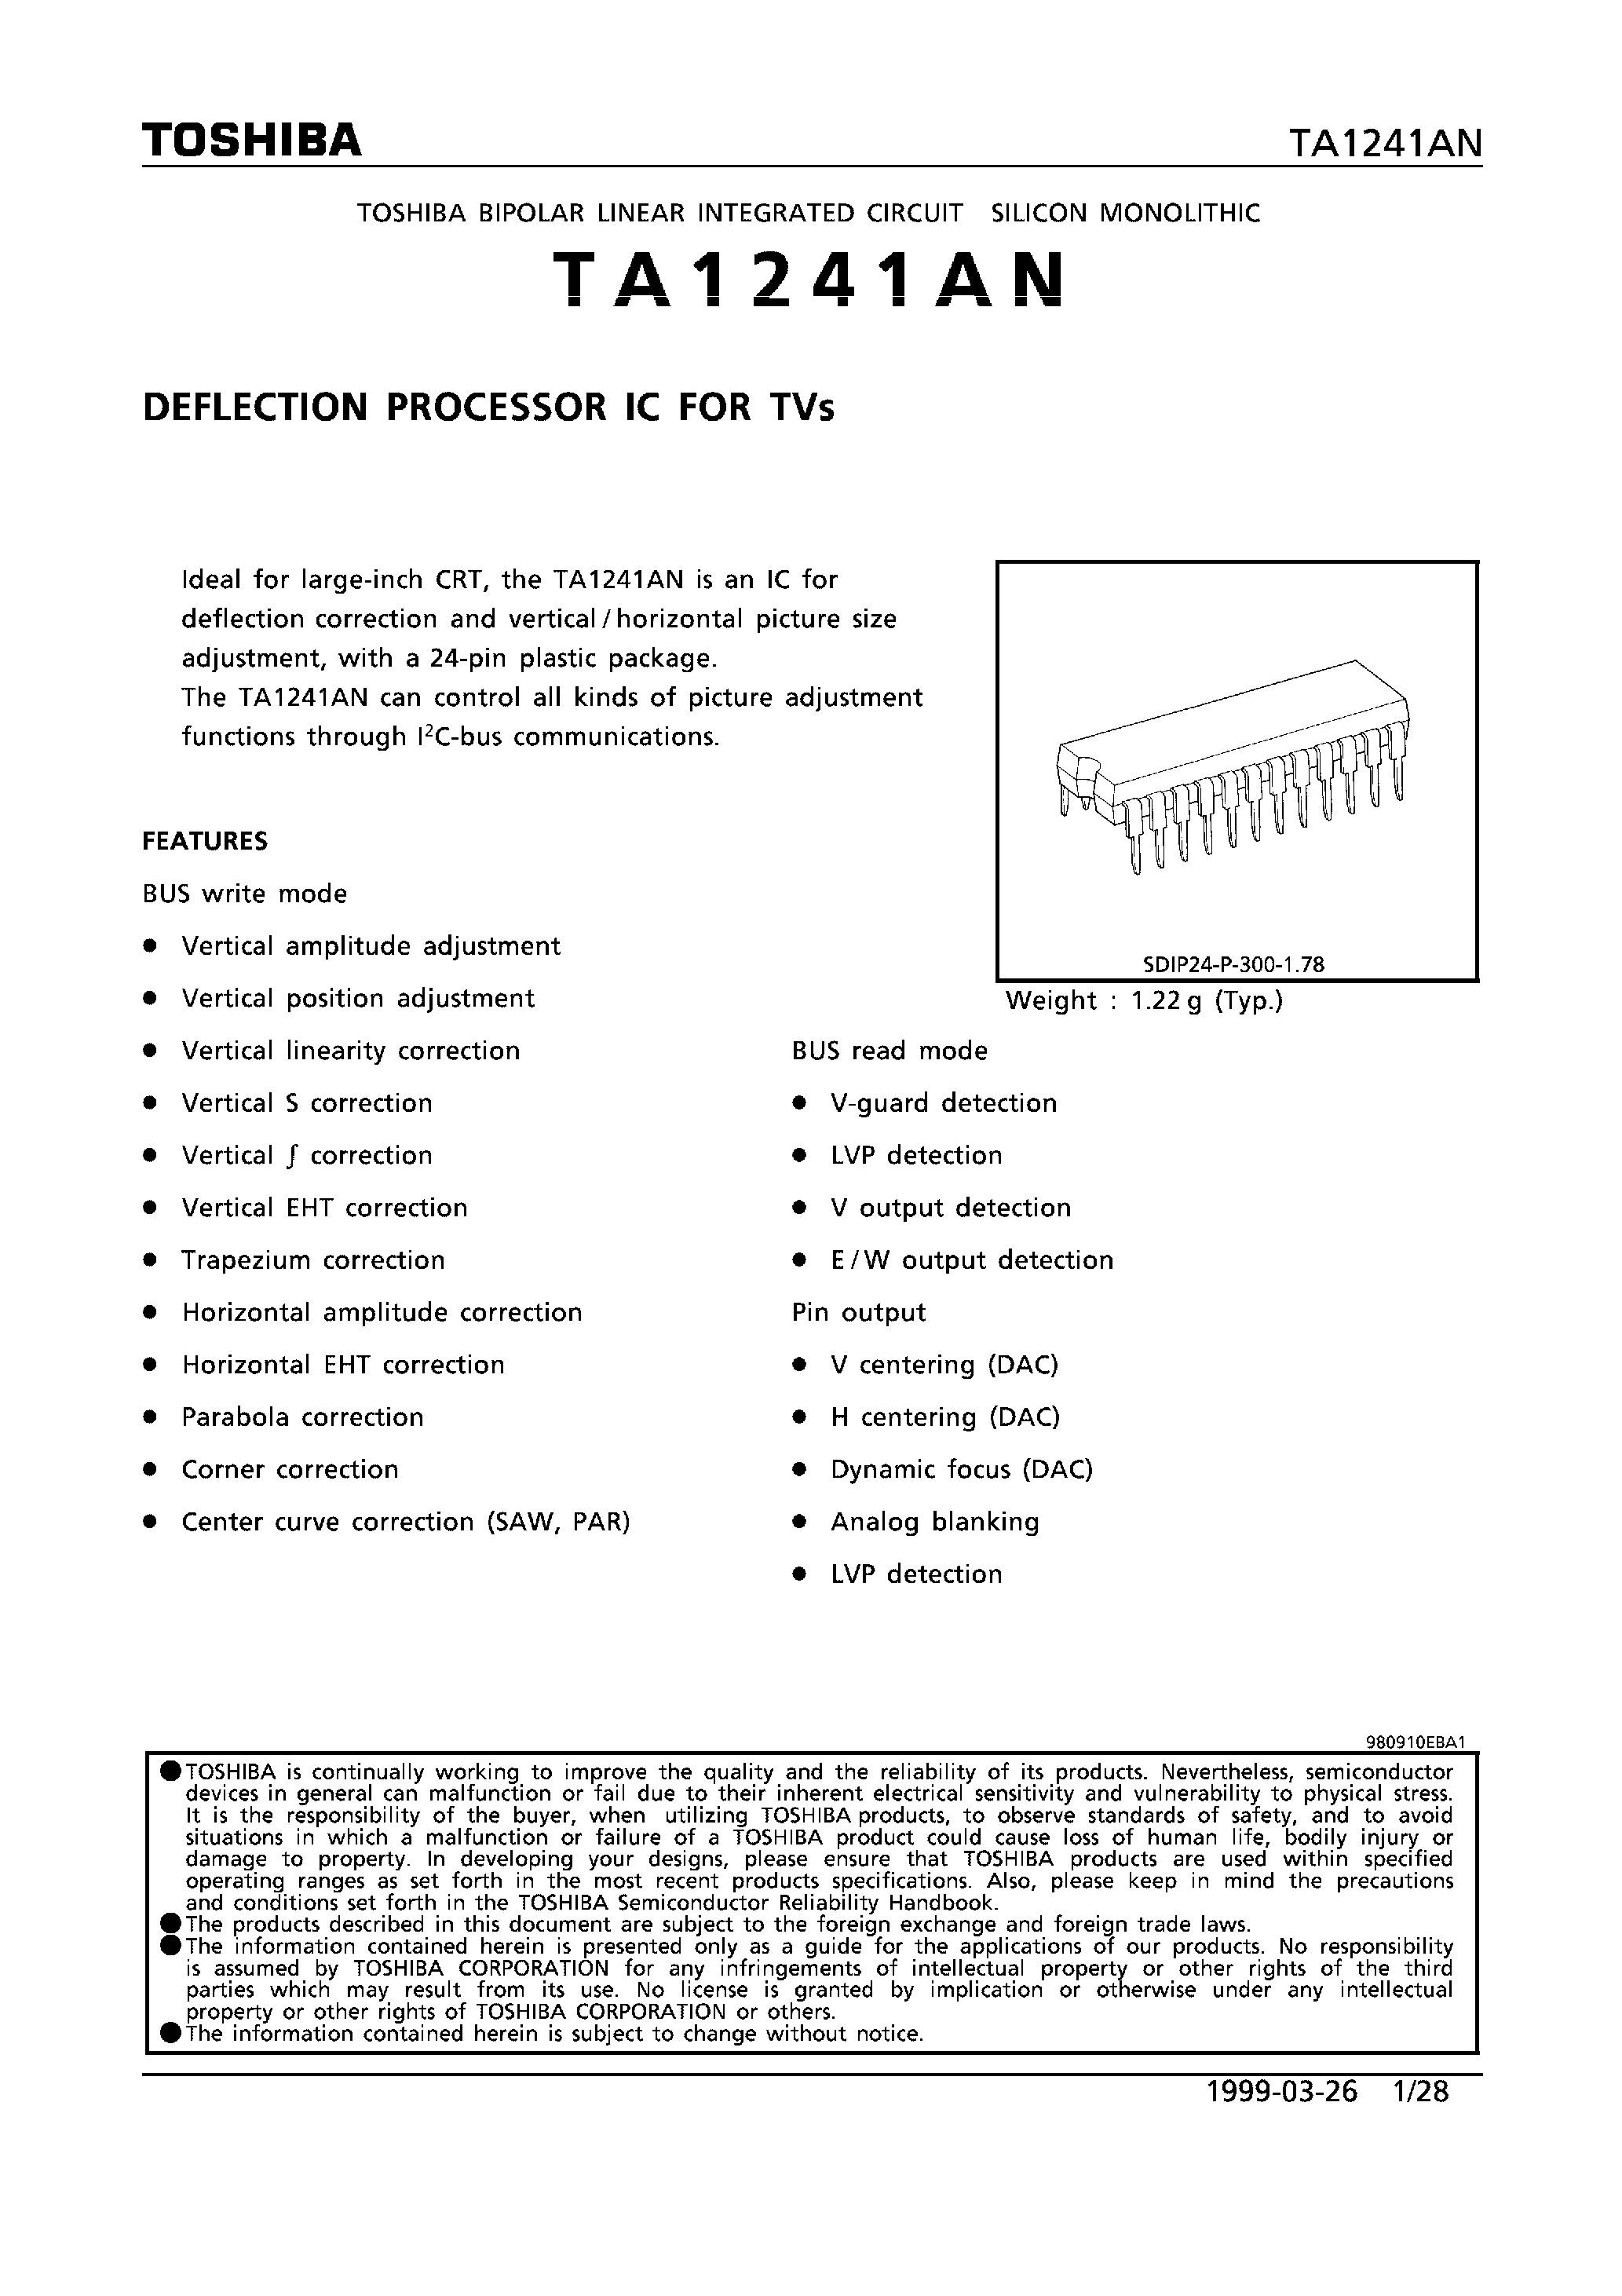 Datasheet TA1241AN - DEFLECTION PROCESSOR IC FOR TVs page 1